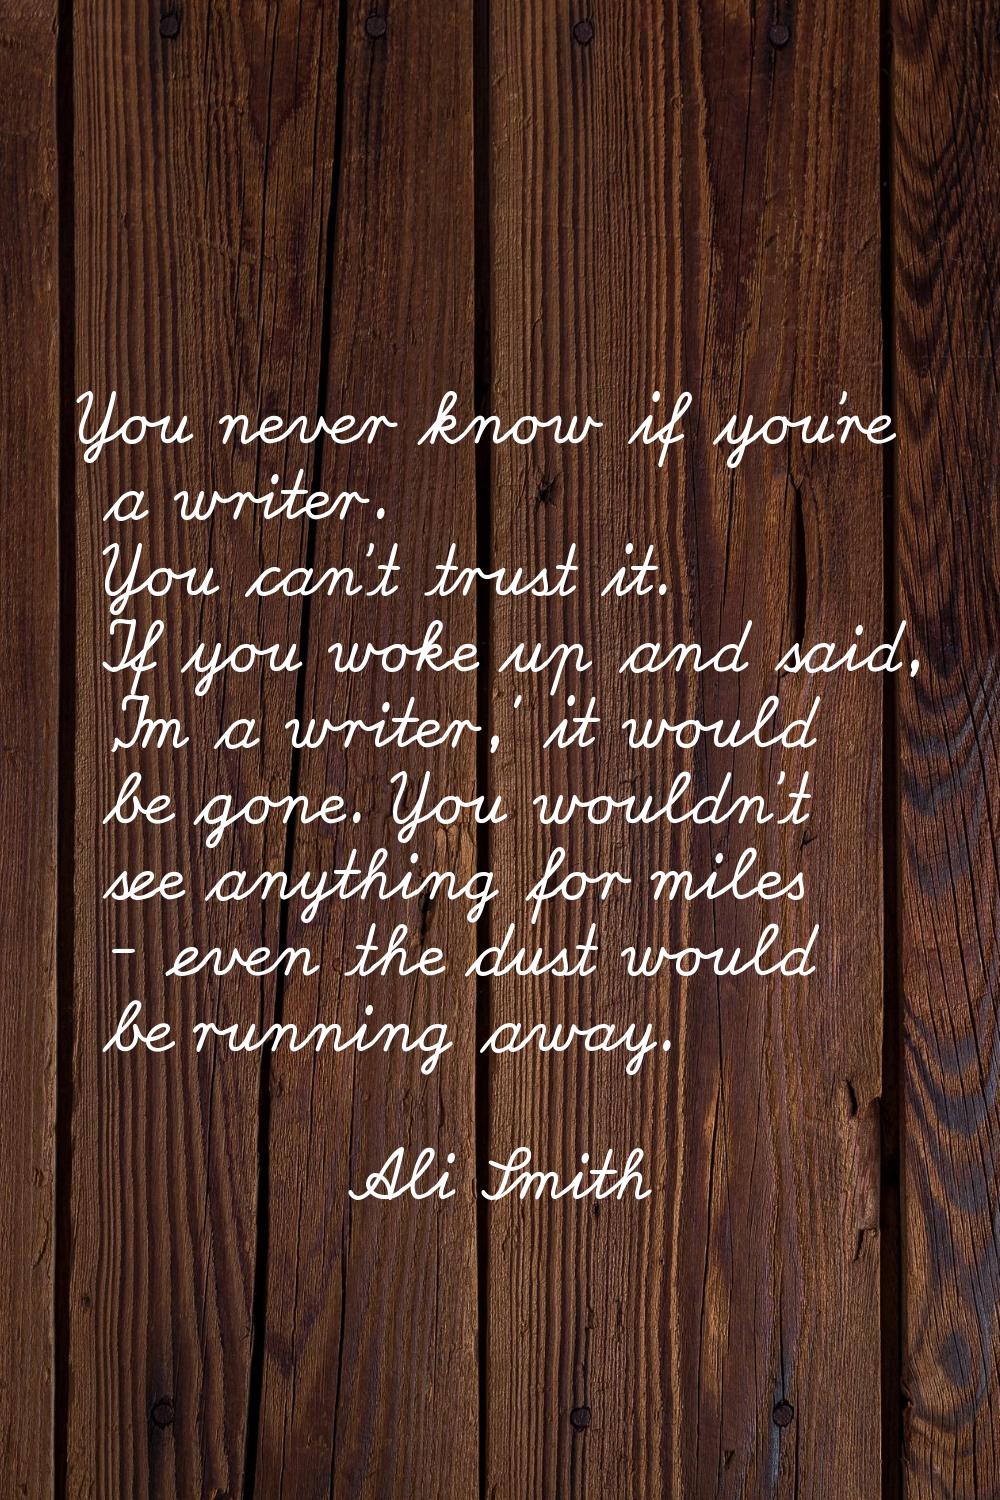 You never know if you're a writer. You can't trust it. If you woke up and said, 'I'm a writer,' it 